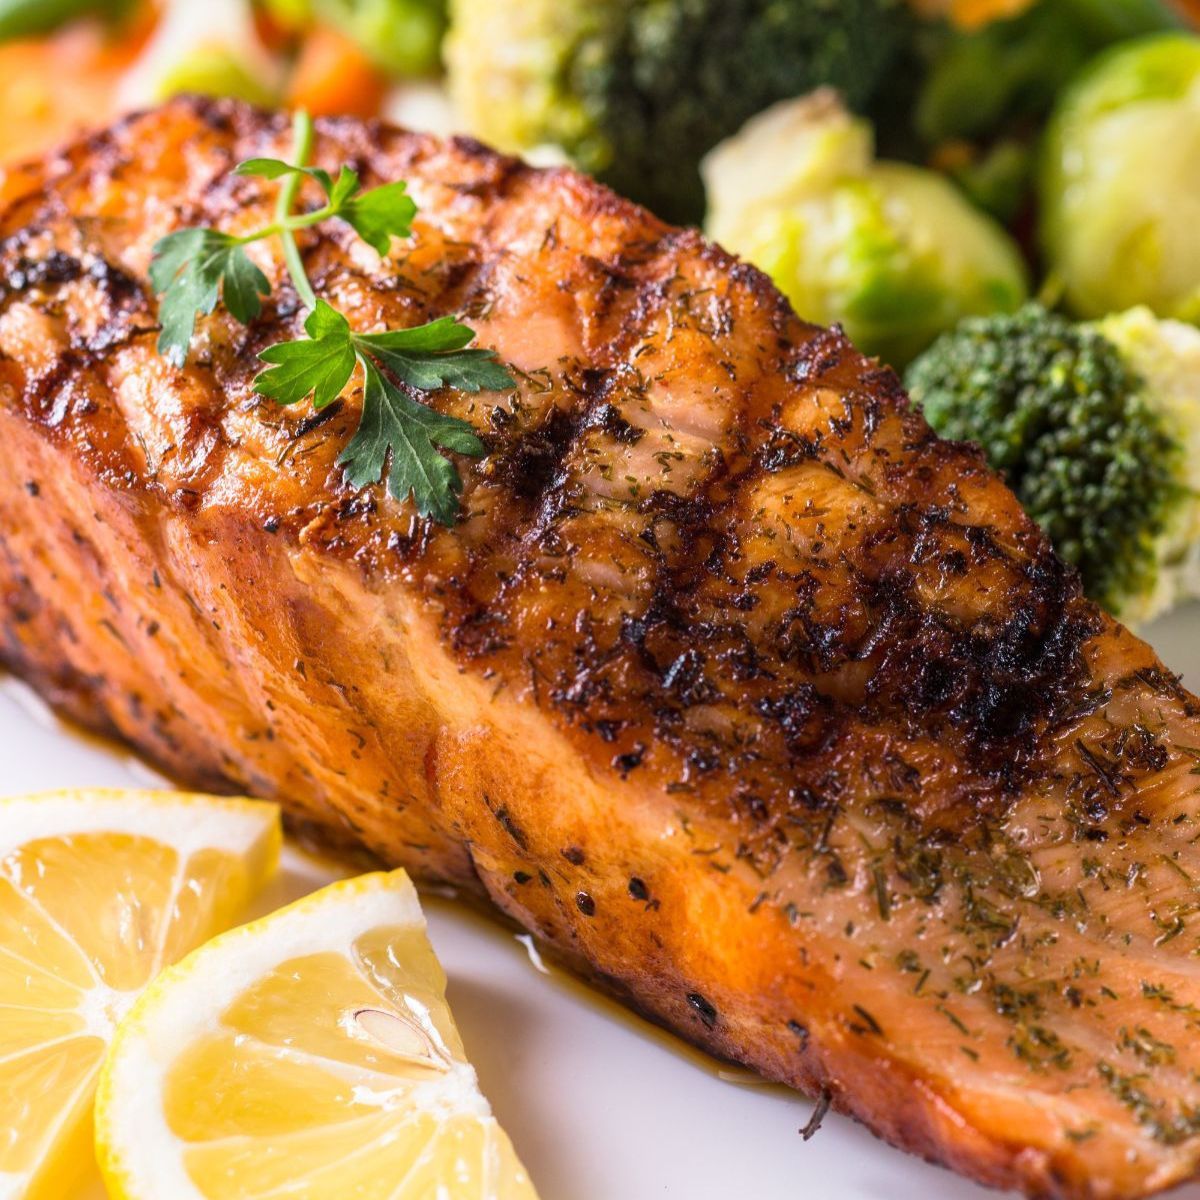 Grilled salmon fillet garnished with parsley, served with broccoli and lemon slices on a white plate, featured in our recipe index.